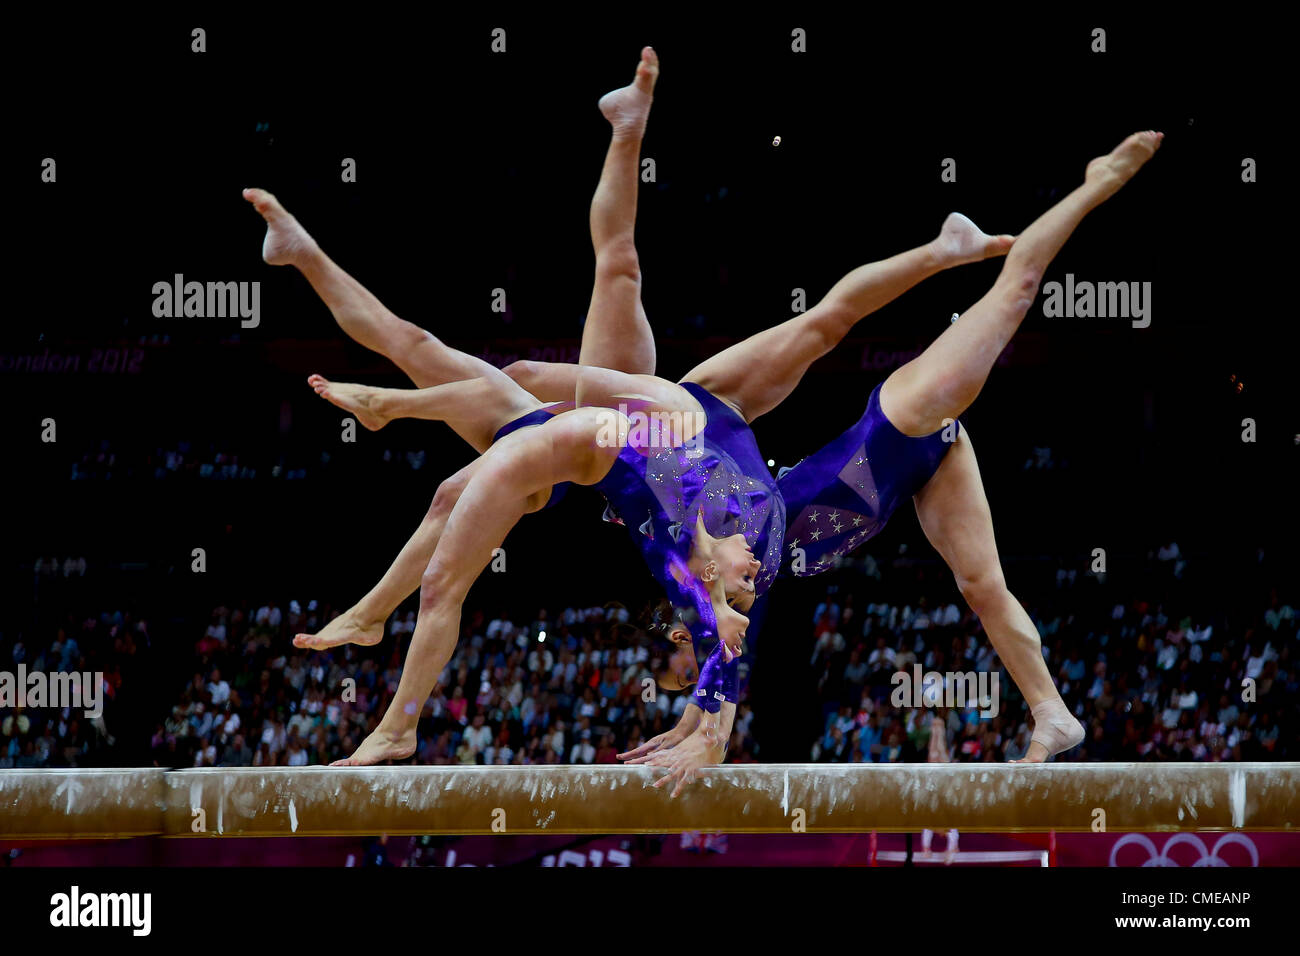 29 July 2012. Jordyn Wieber (USA) preforms on the balance beam during the women's team qualifying at the 2012 Olympic Summer Games, London, England Stock Photo